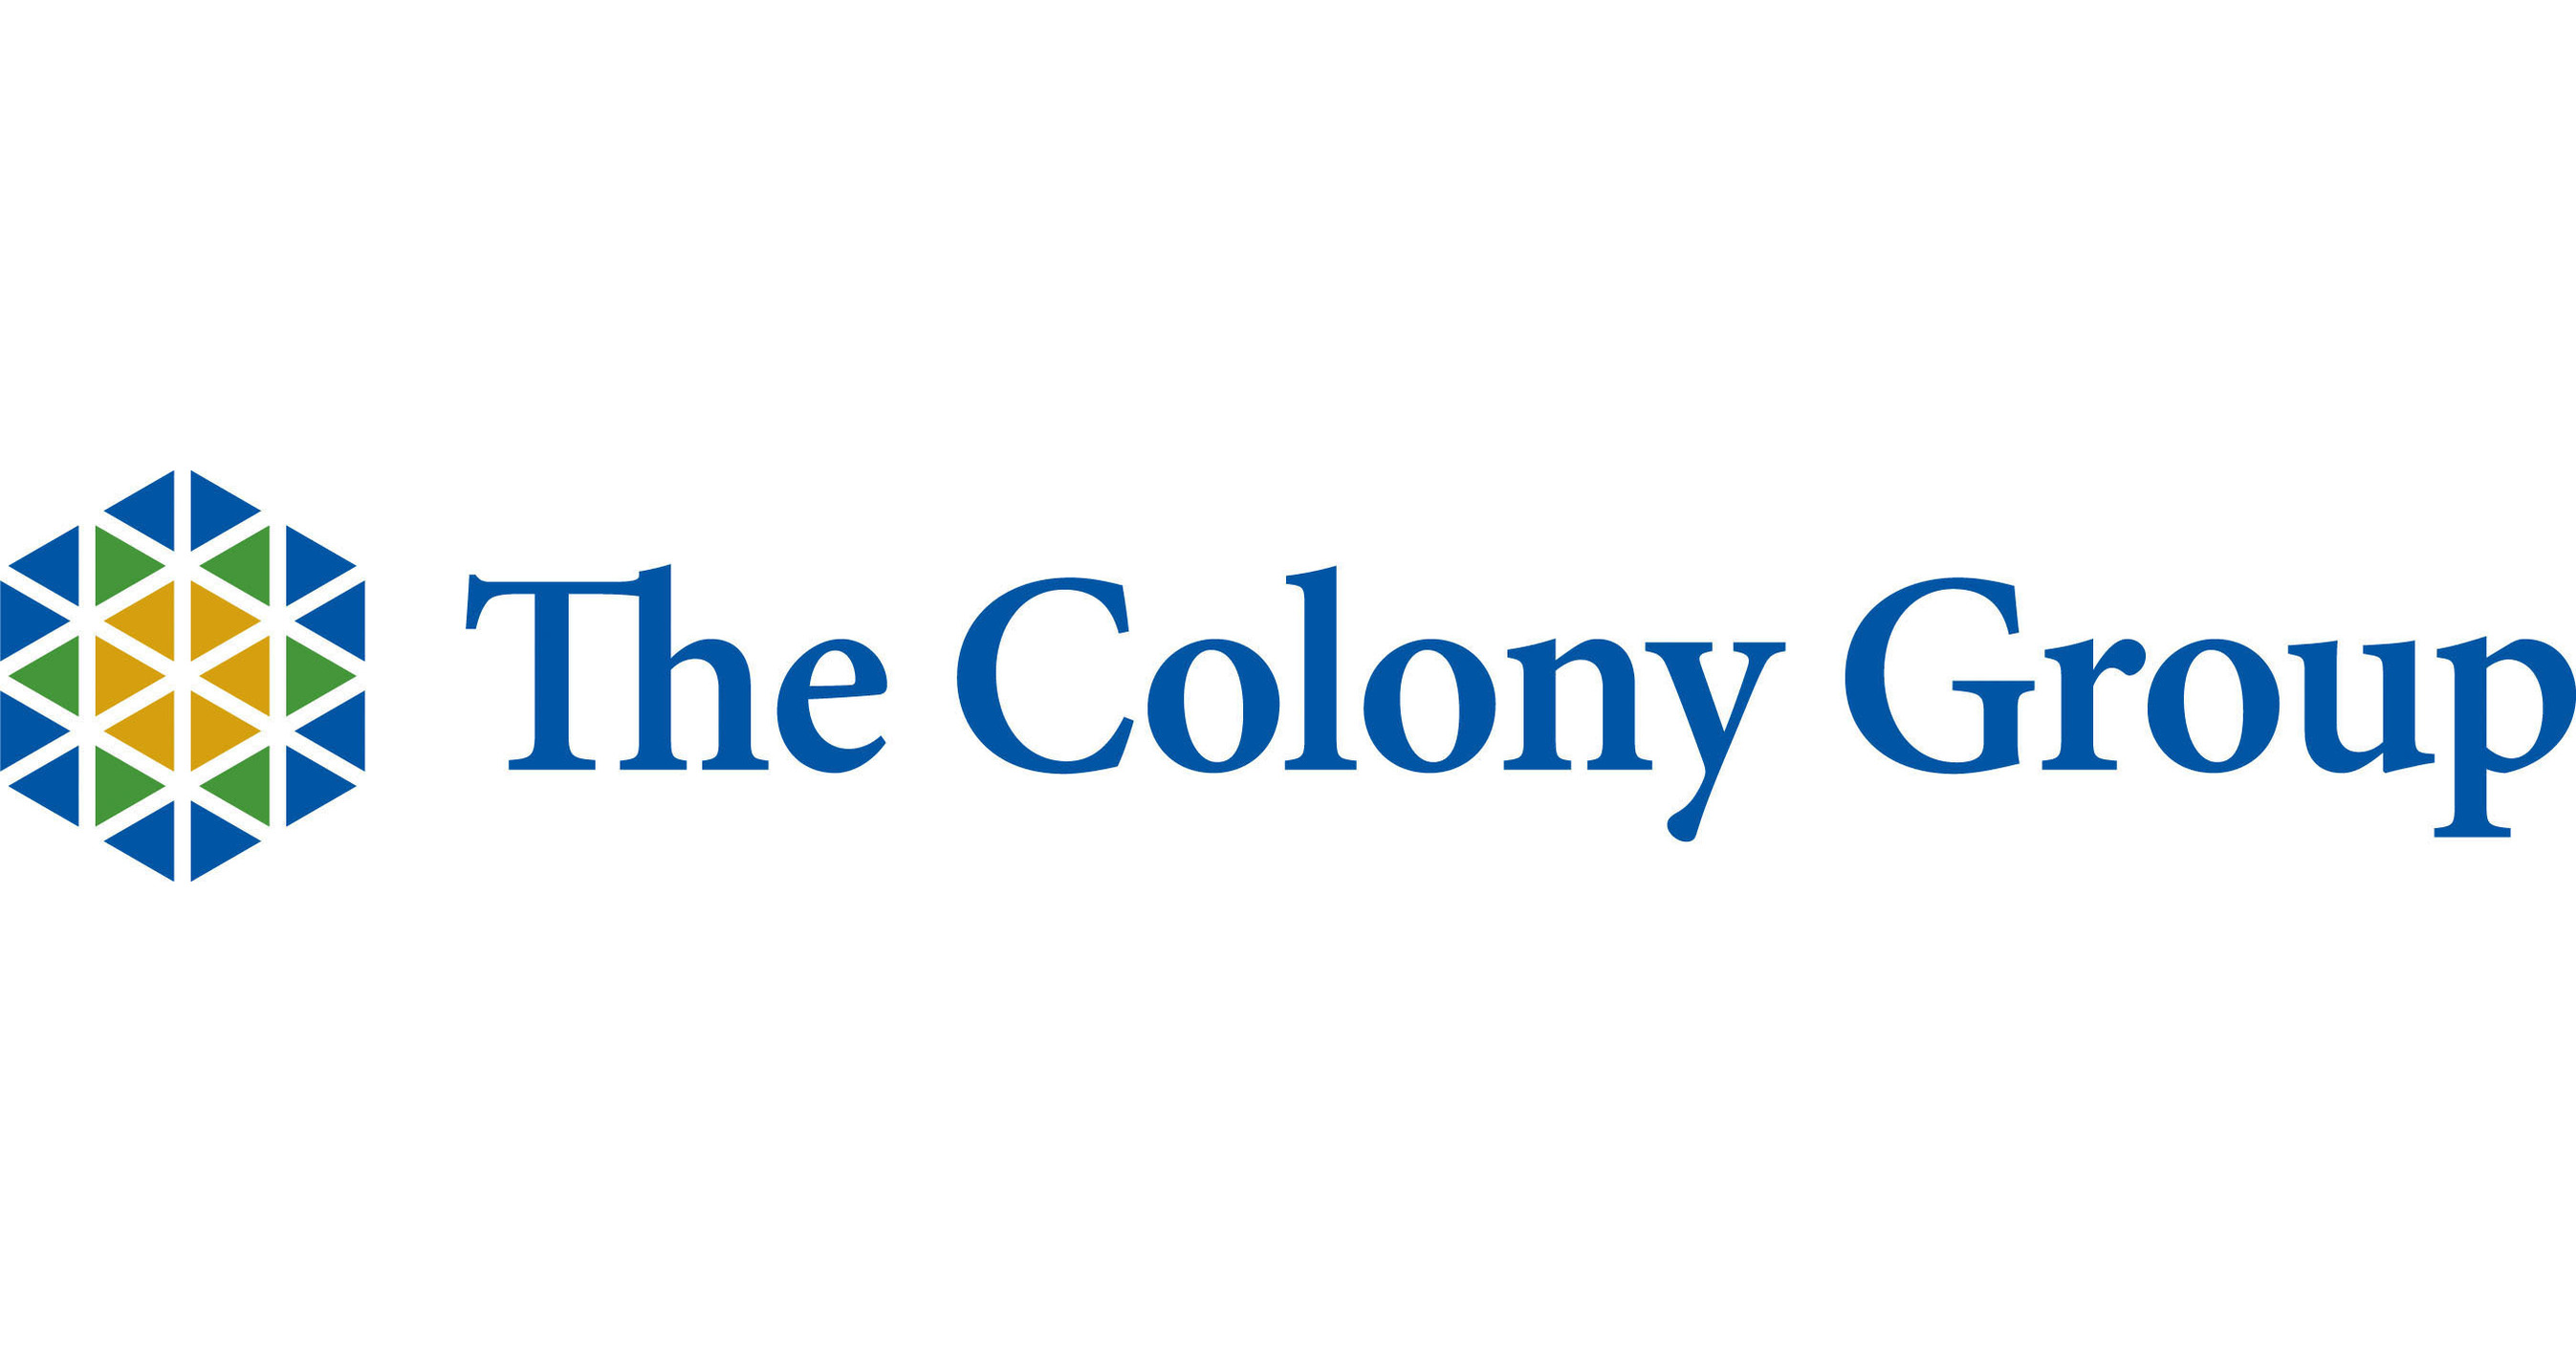 The Colony Group logo